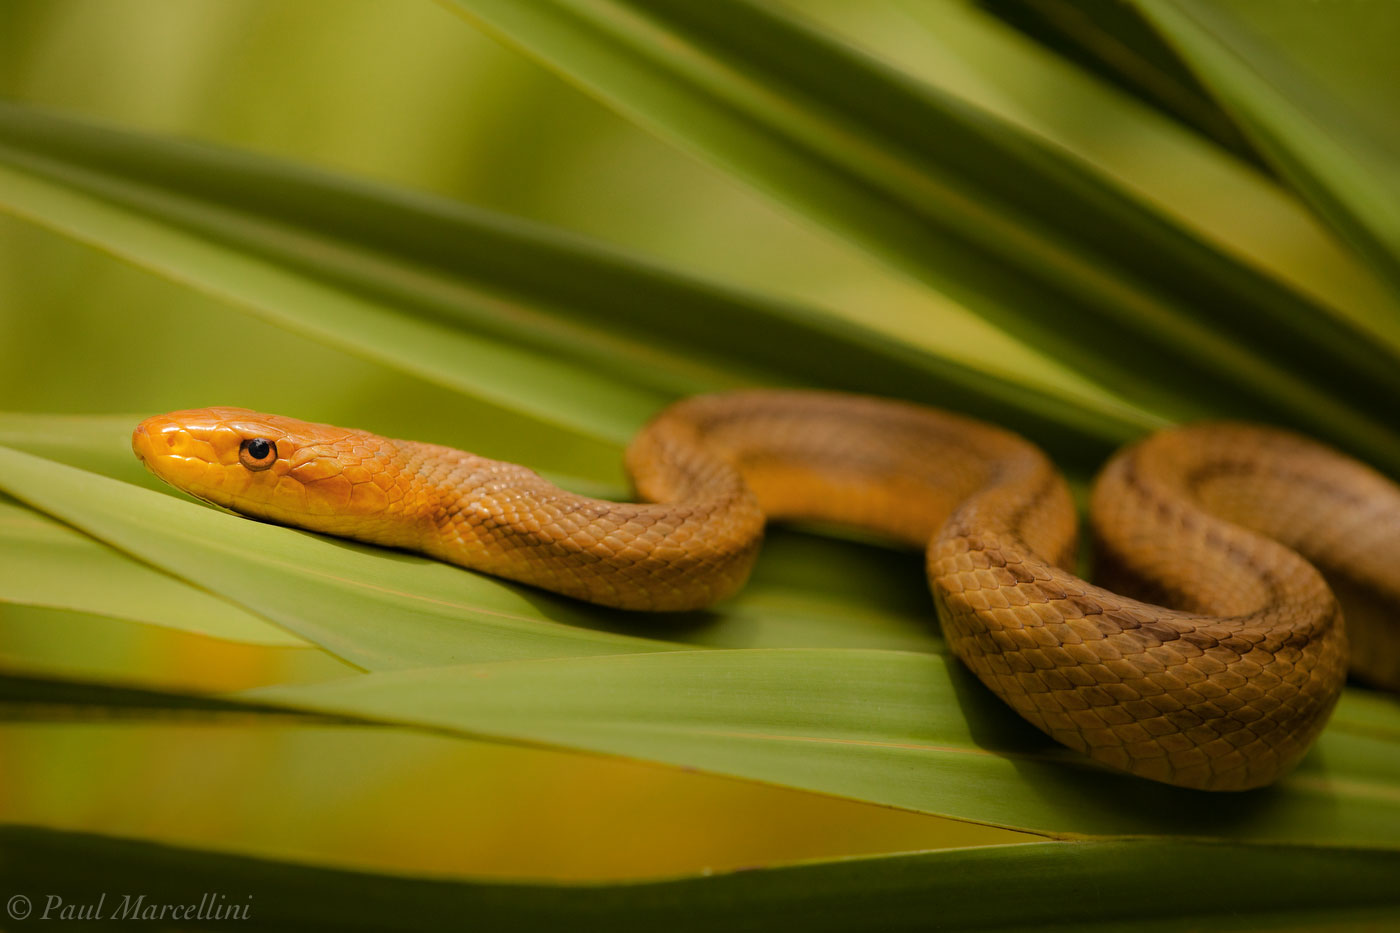 A subspecies of the beautiful Chicken Snake or Yellow Rat Snake (Elaphe obsoleta rossalleni).